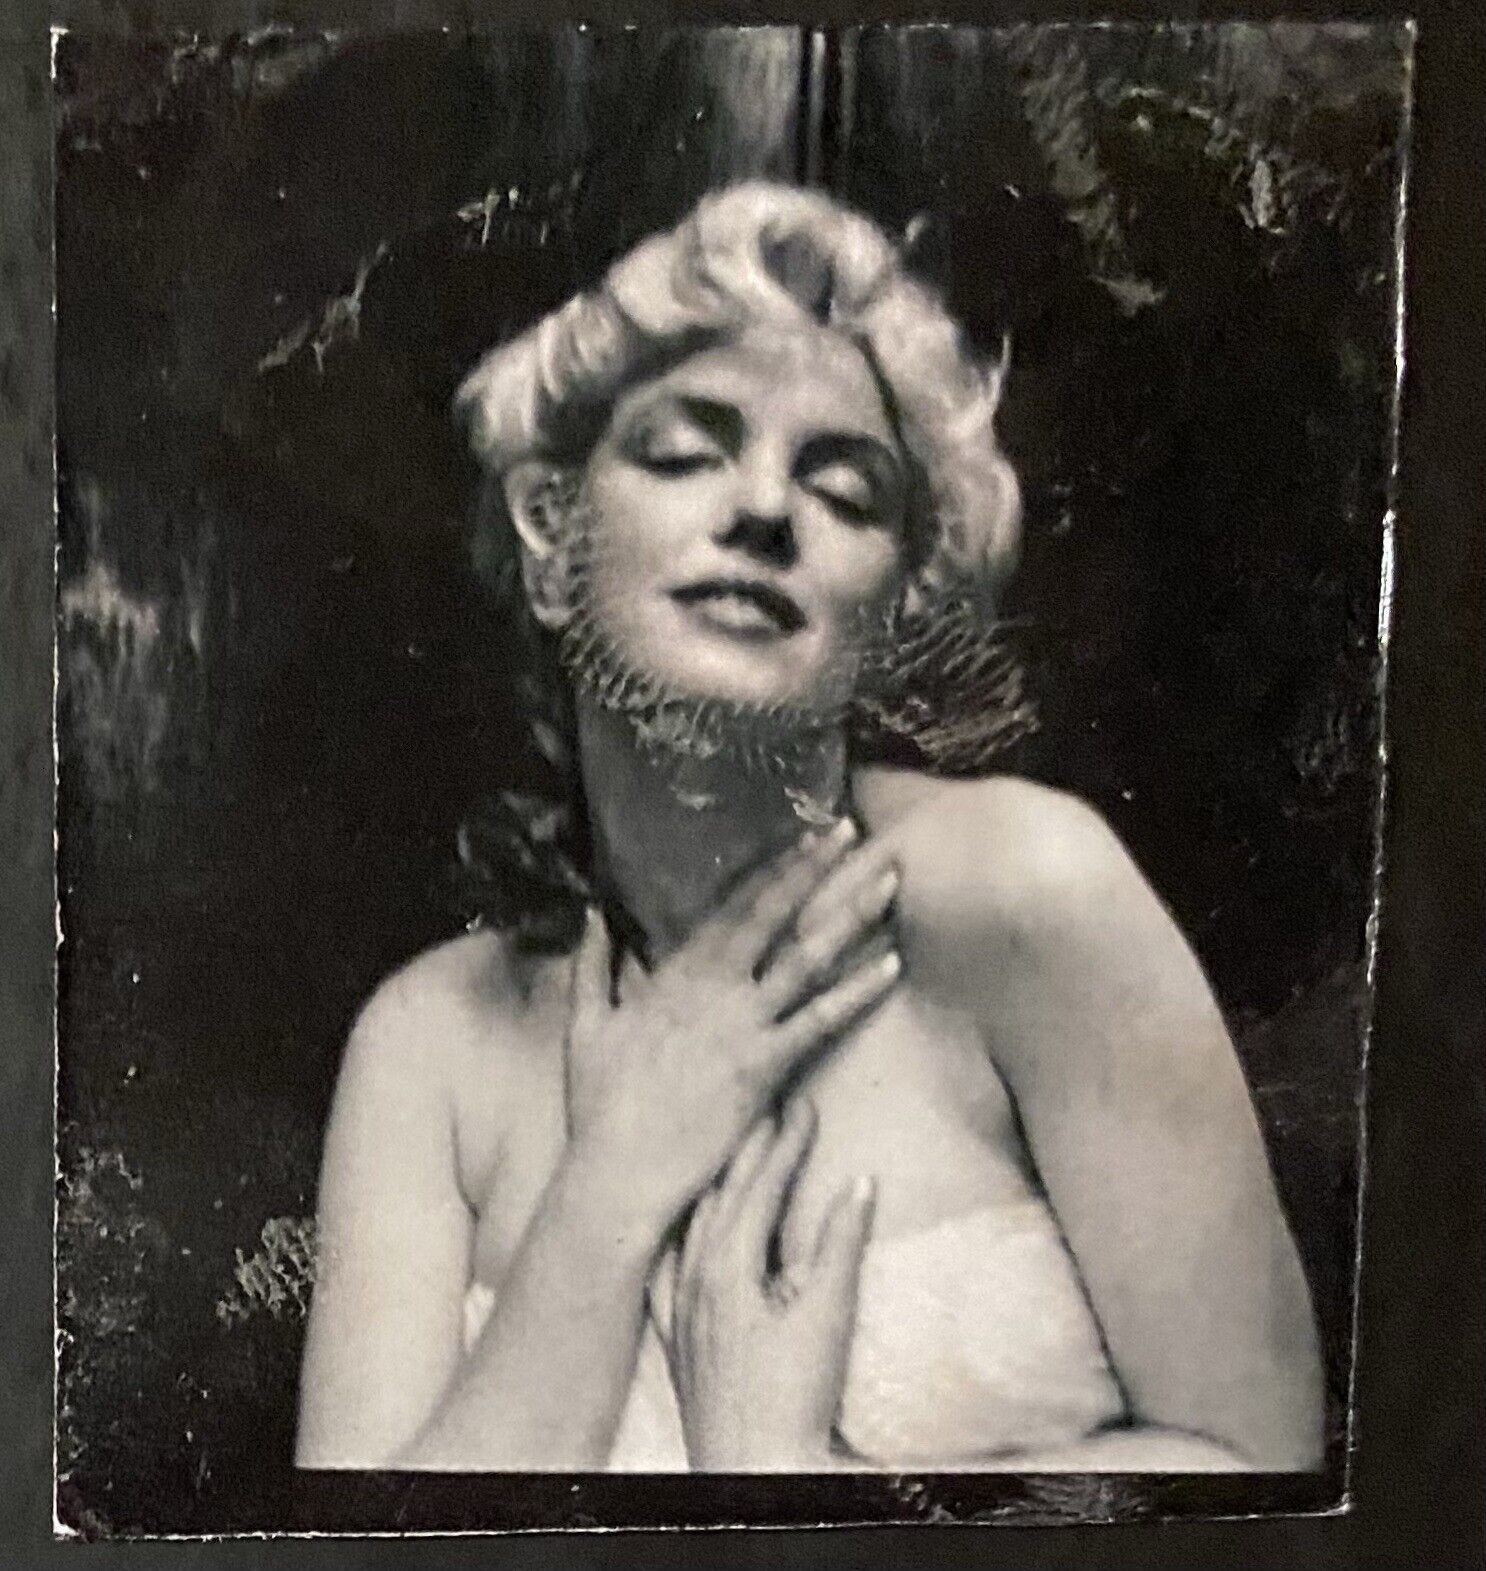 1955 1956 Marilyn Monroe Original Photo Cecil Beaton Contact Photograph Stamped